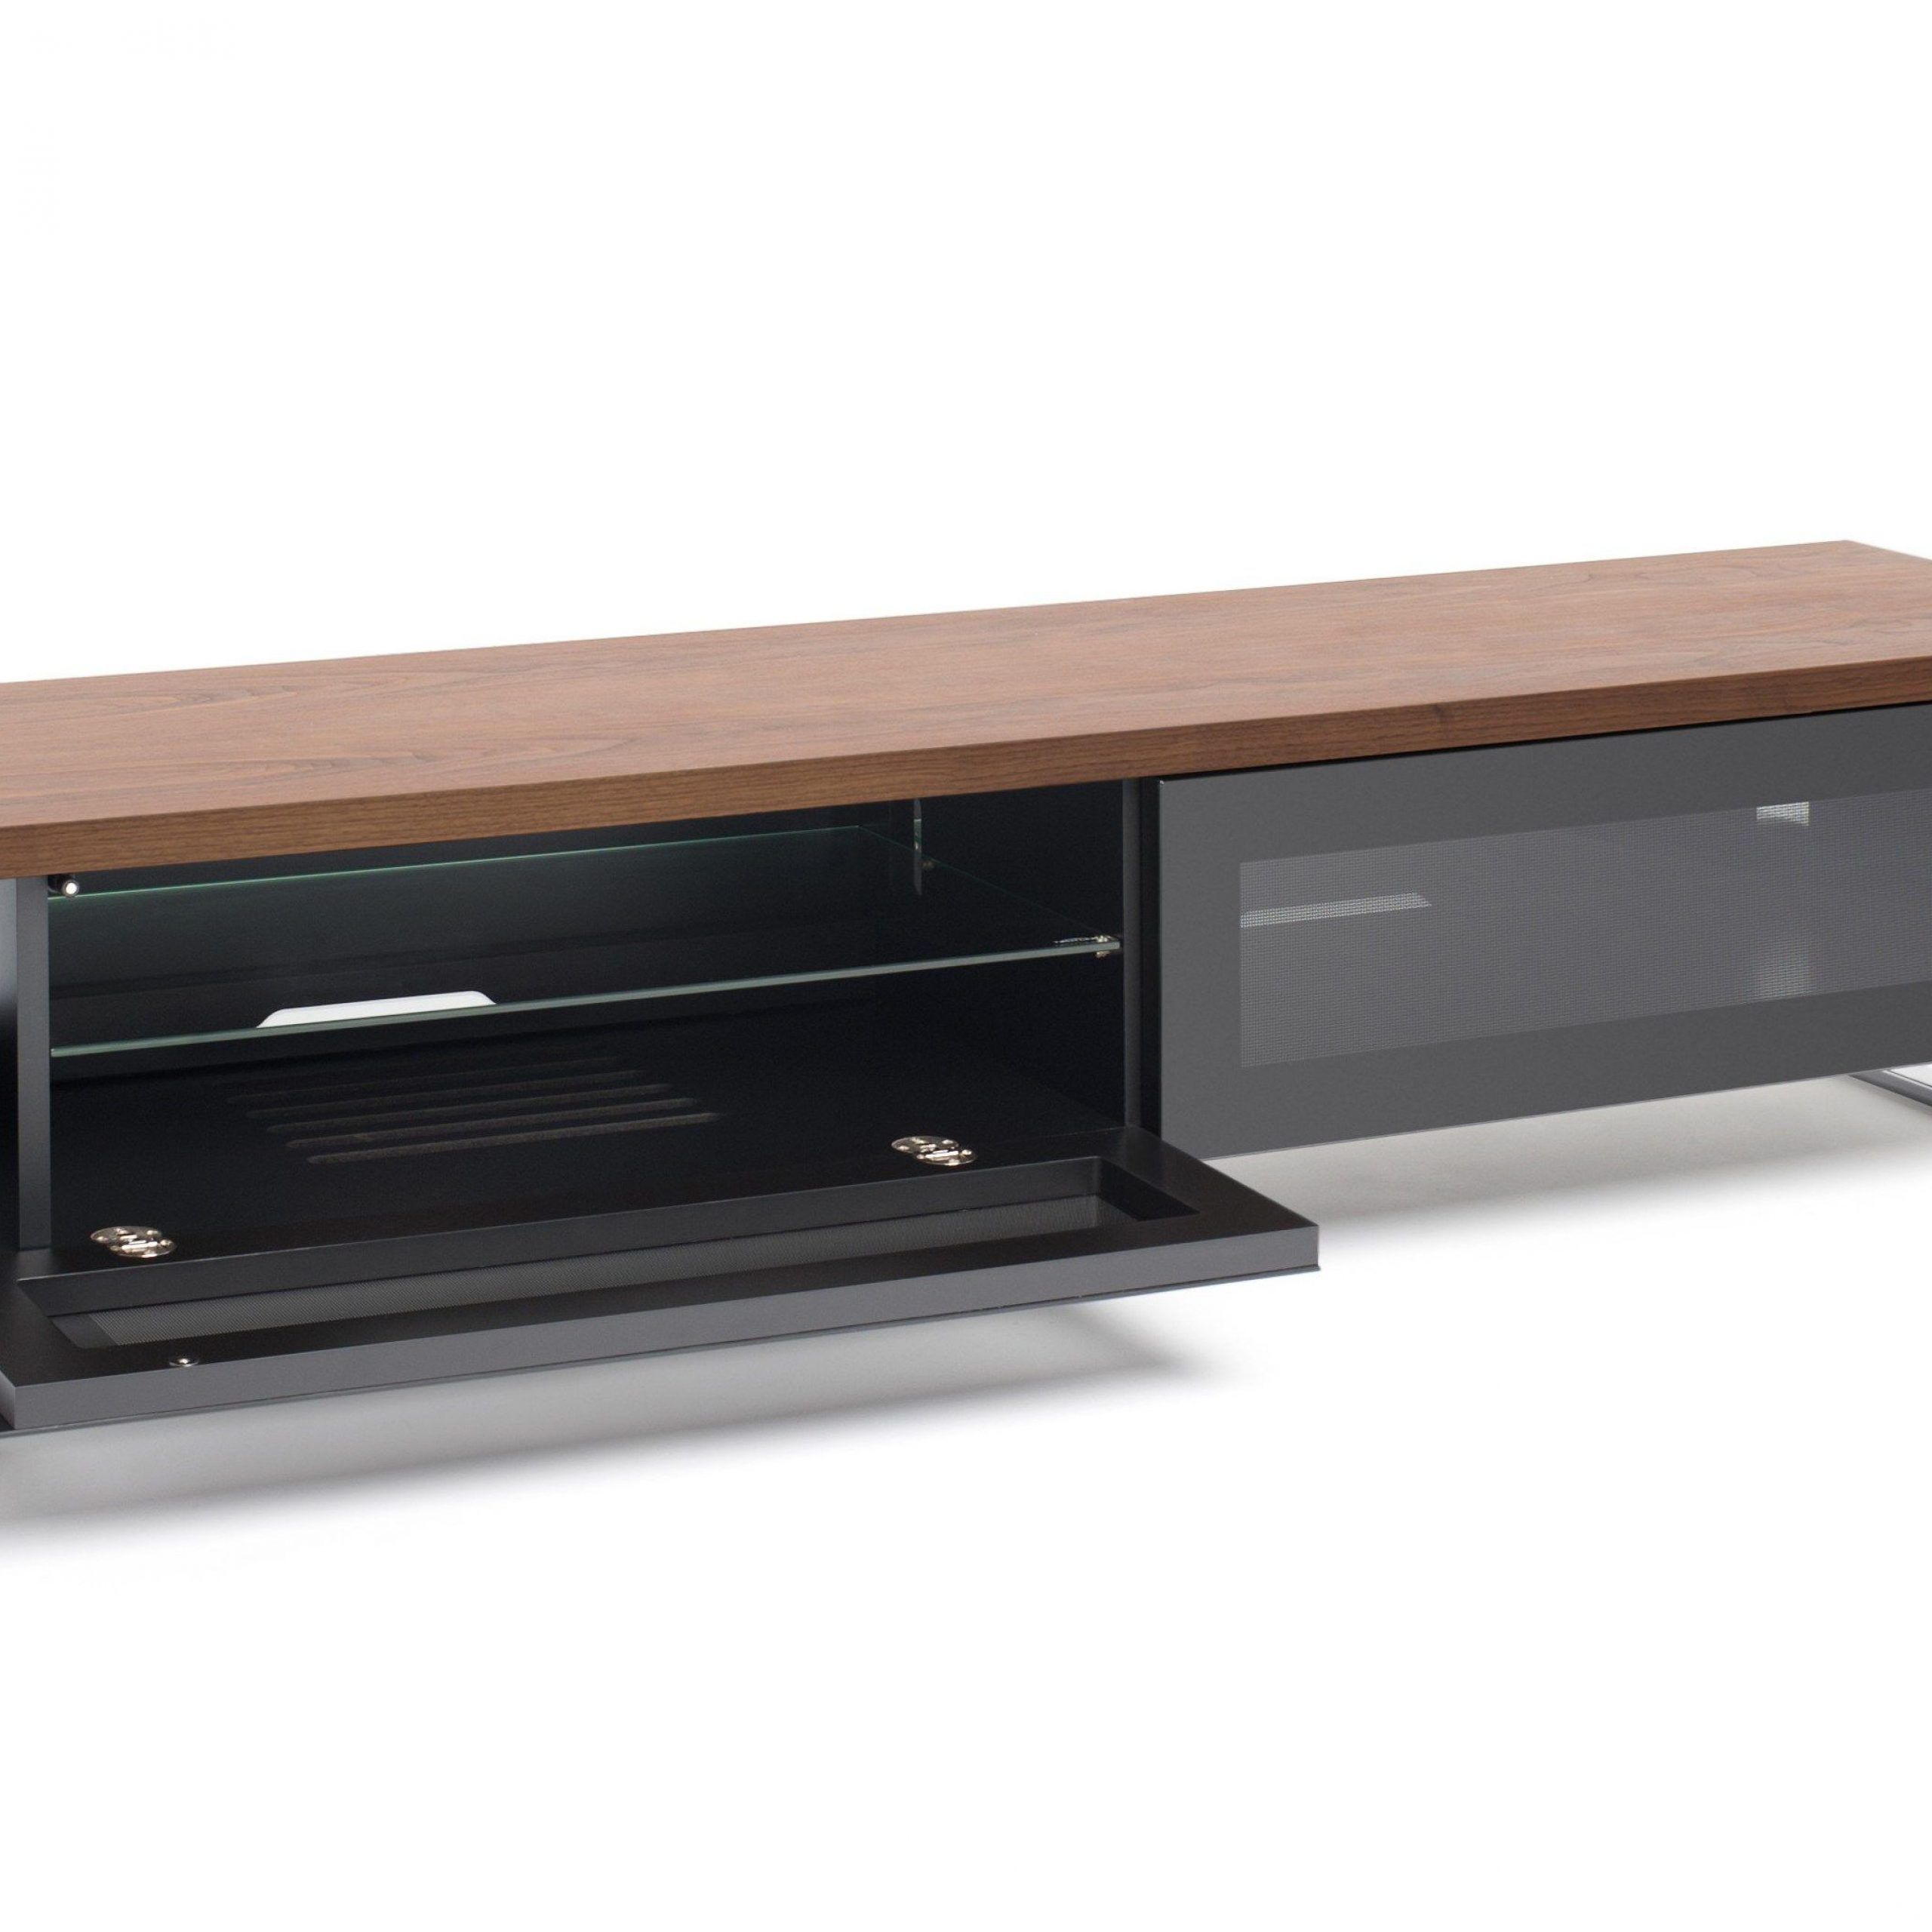 Low Profile Tv Stand – Ye520 | Low Profile Tv Stand Throughout Long Low Tv Cabinets (View 11 of 15)